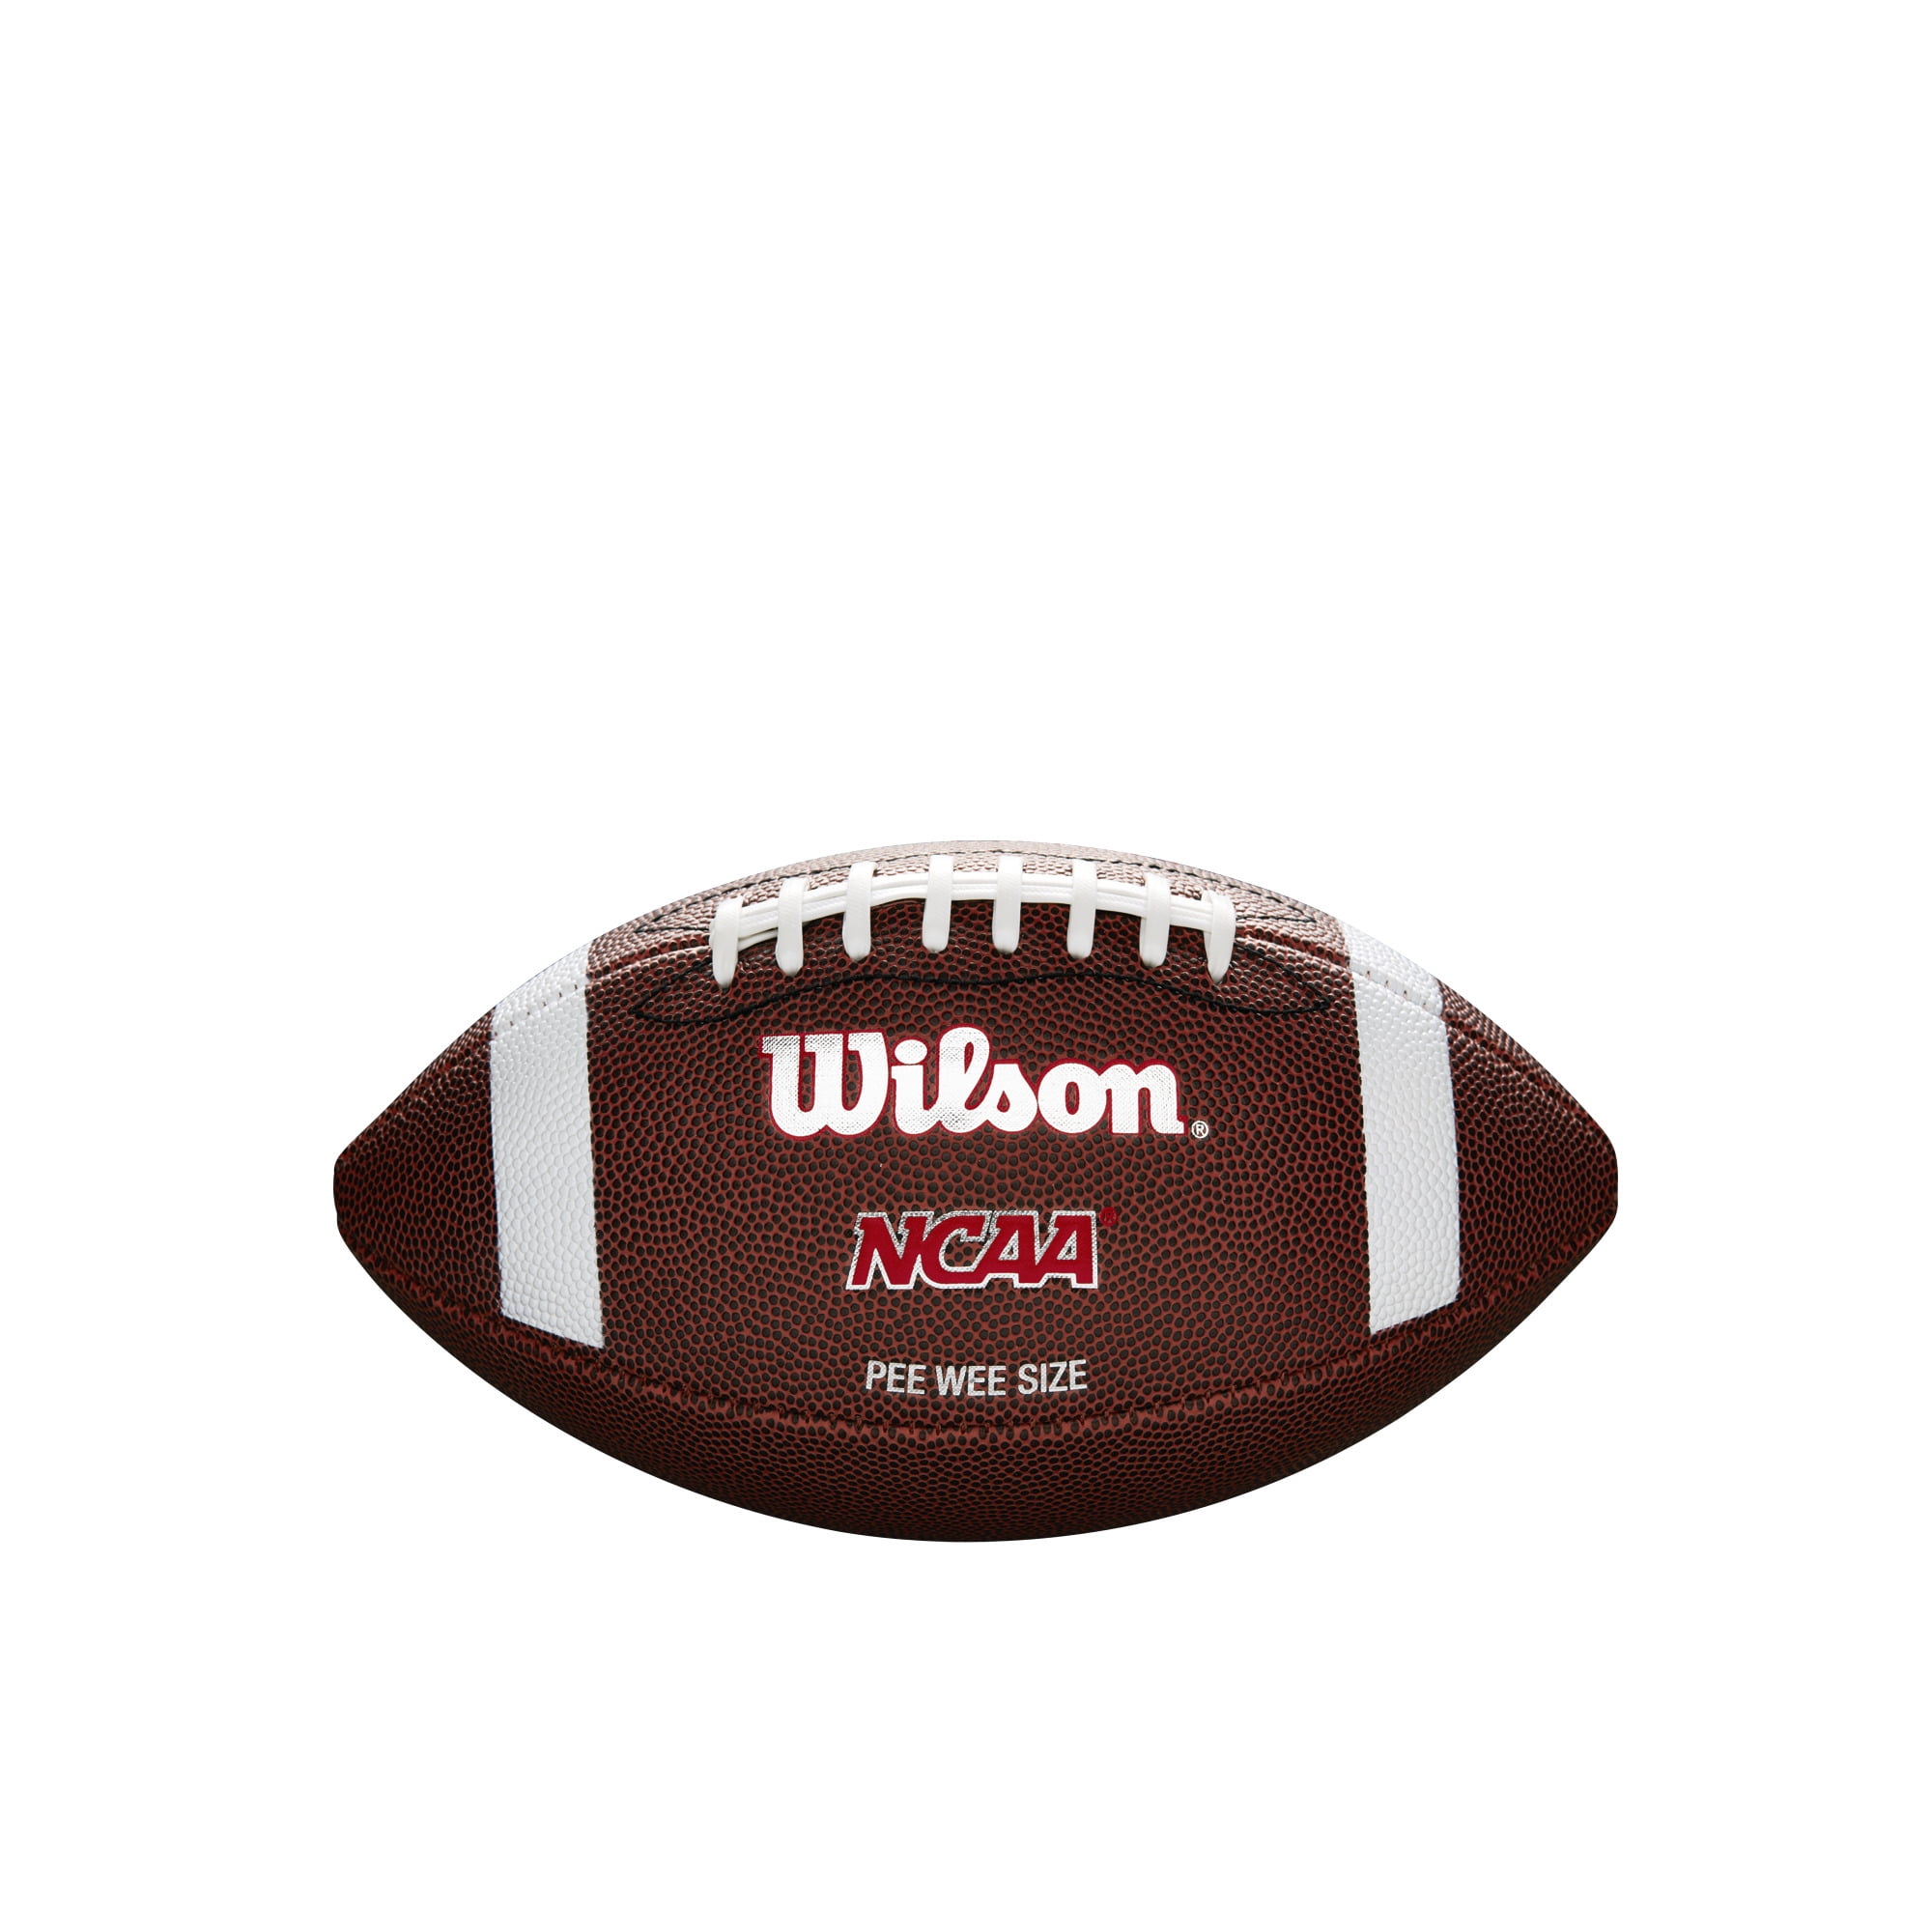 6 7 Junior Kids Sports Toy Youth American Football Outdoor Ball Game No 